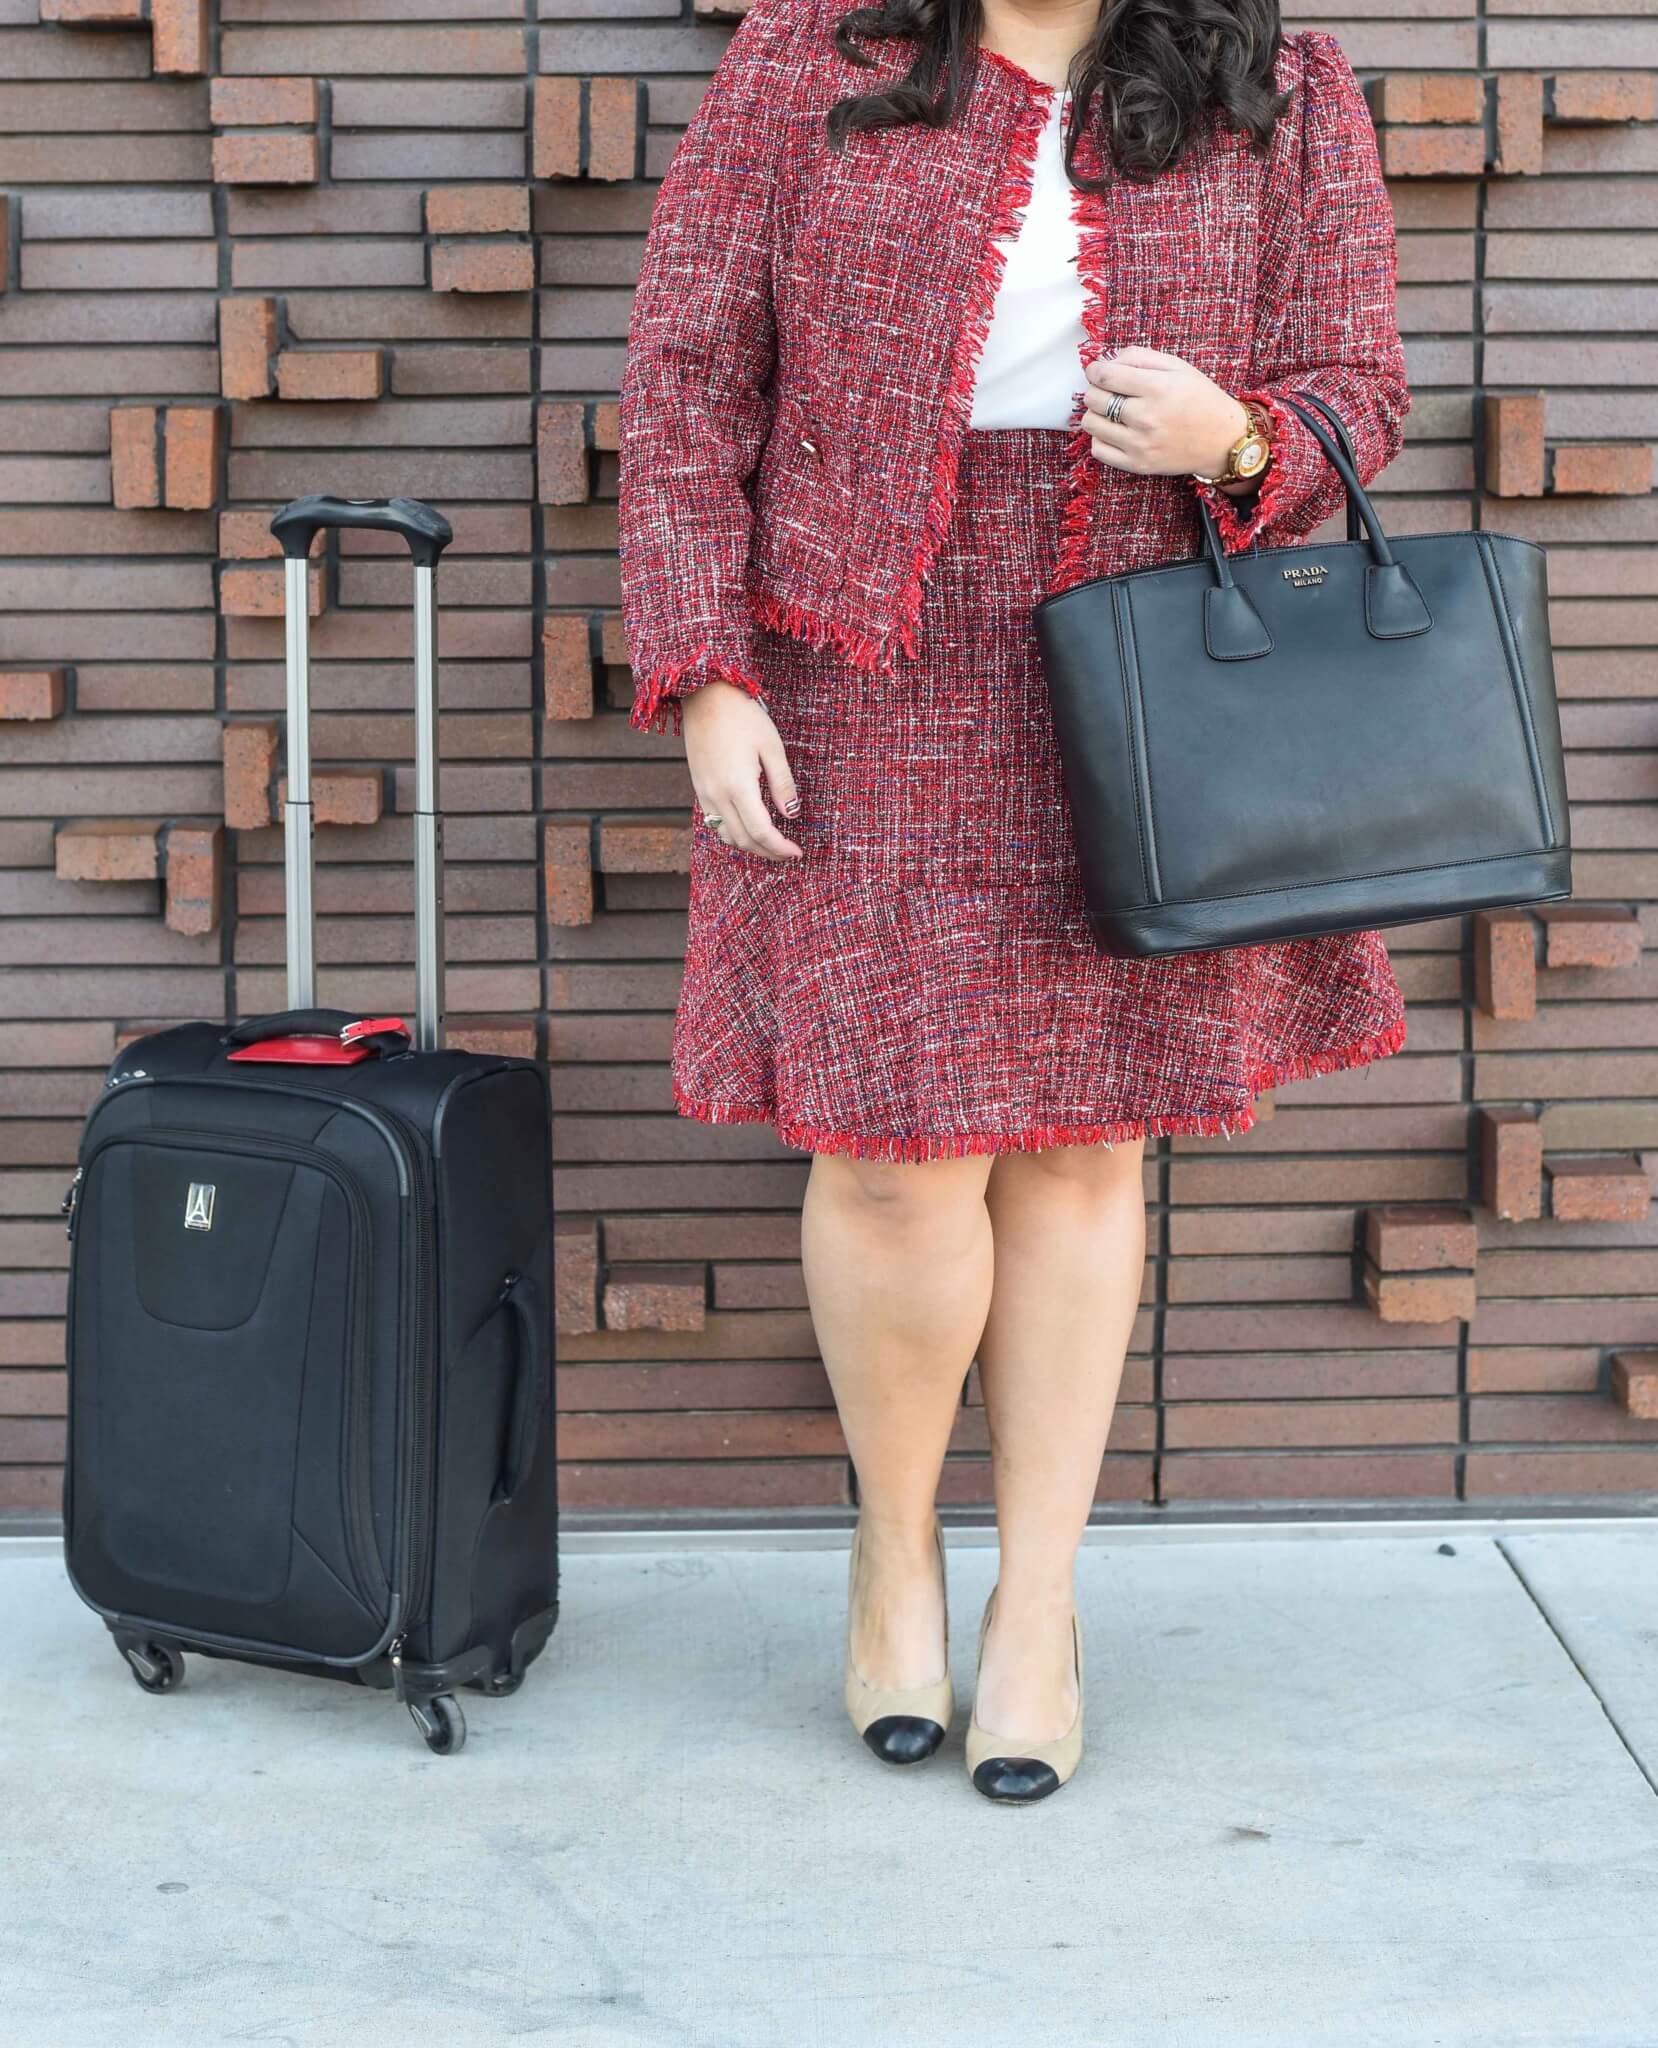 Wearing color to work should be a rule and this plus size suit is perfect for any business casual or business formal environment. #plussize #plussizestyle #workwear